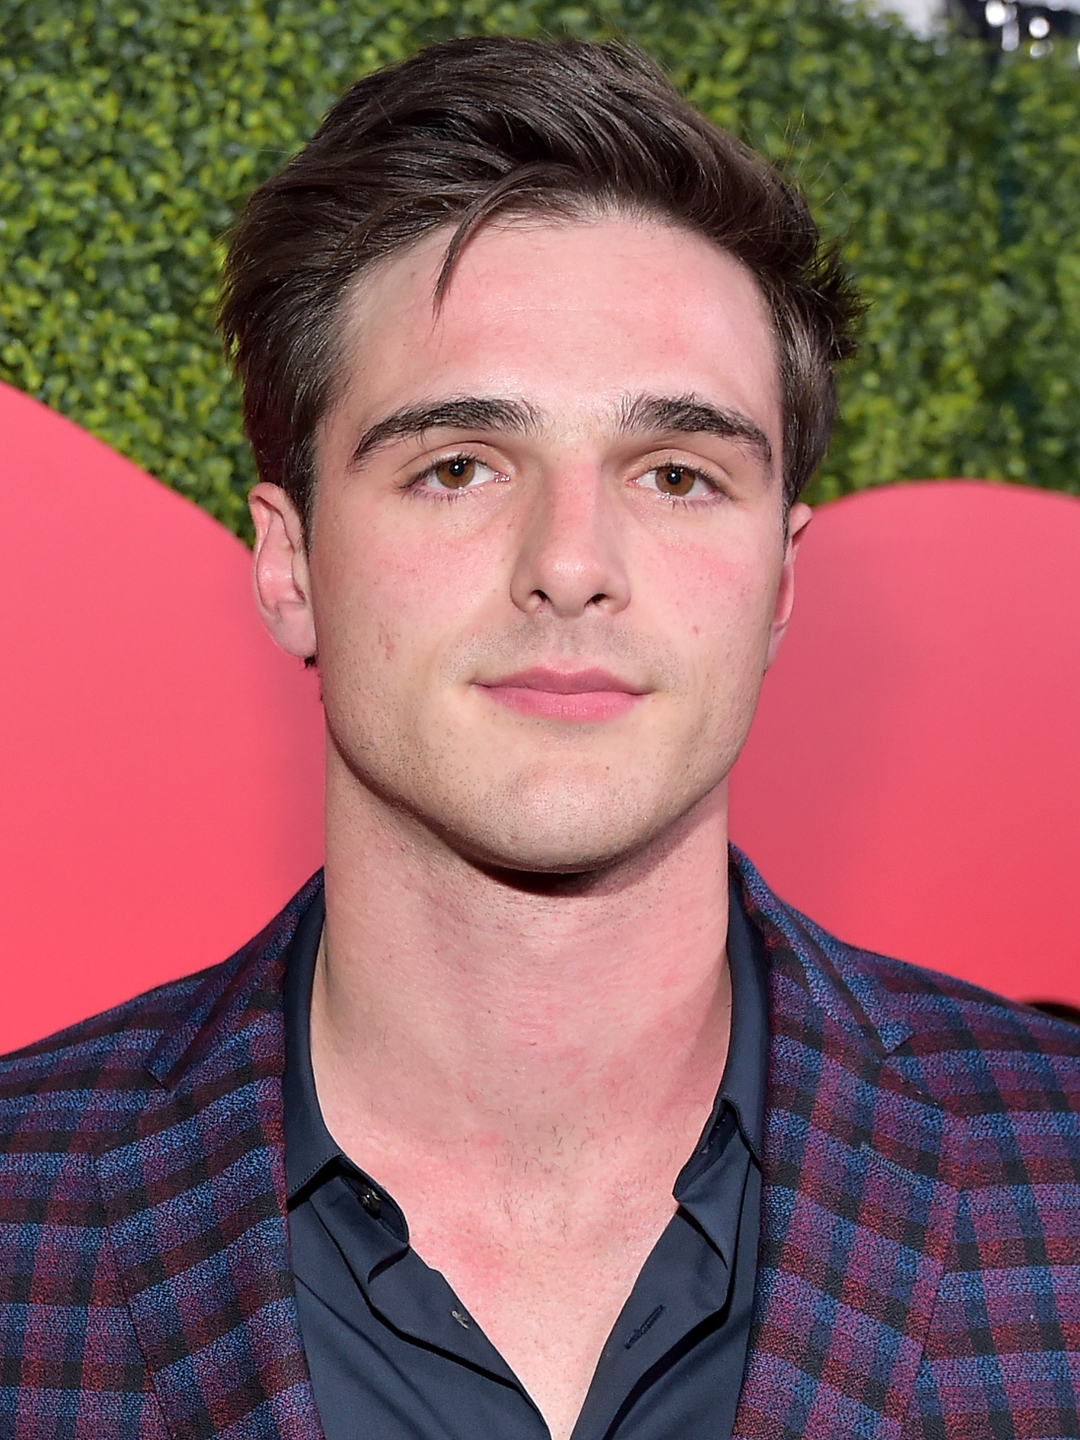 Jacob Elordi height and weight